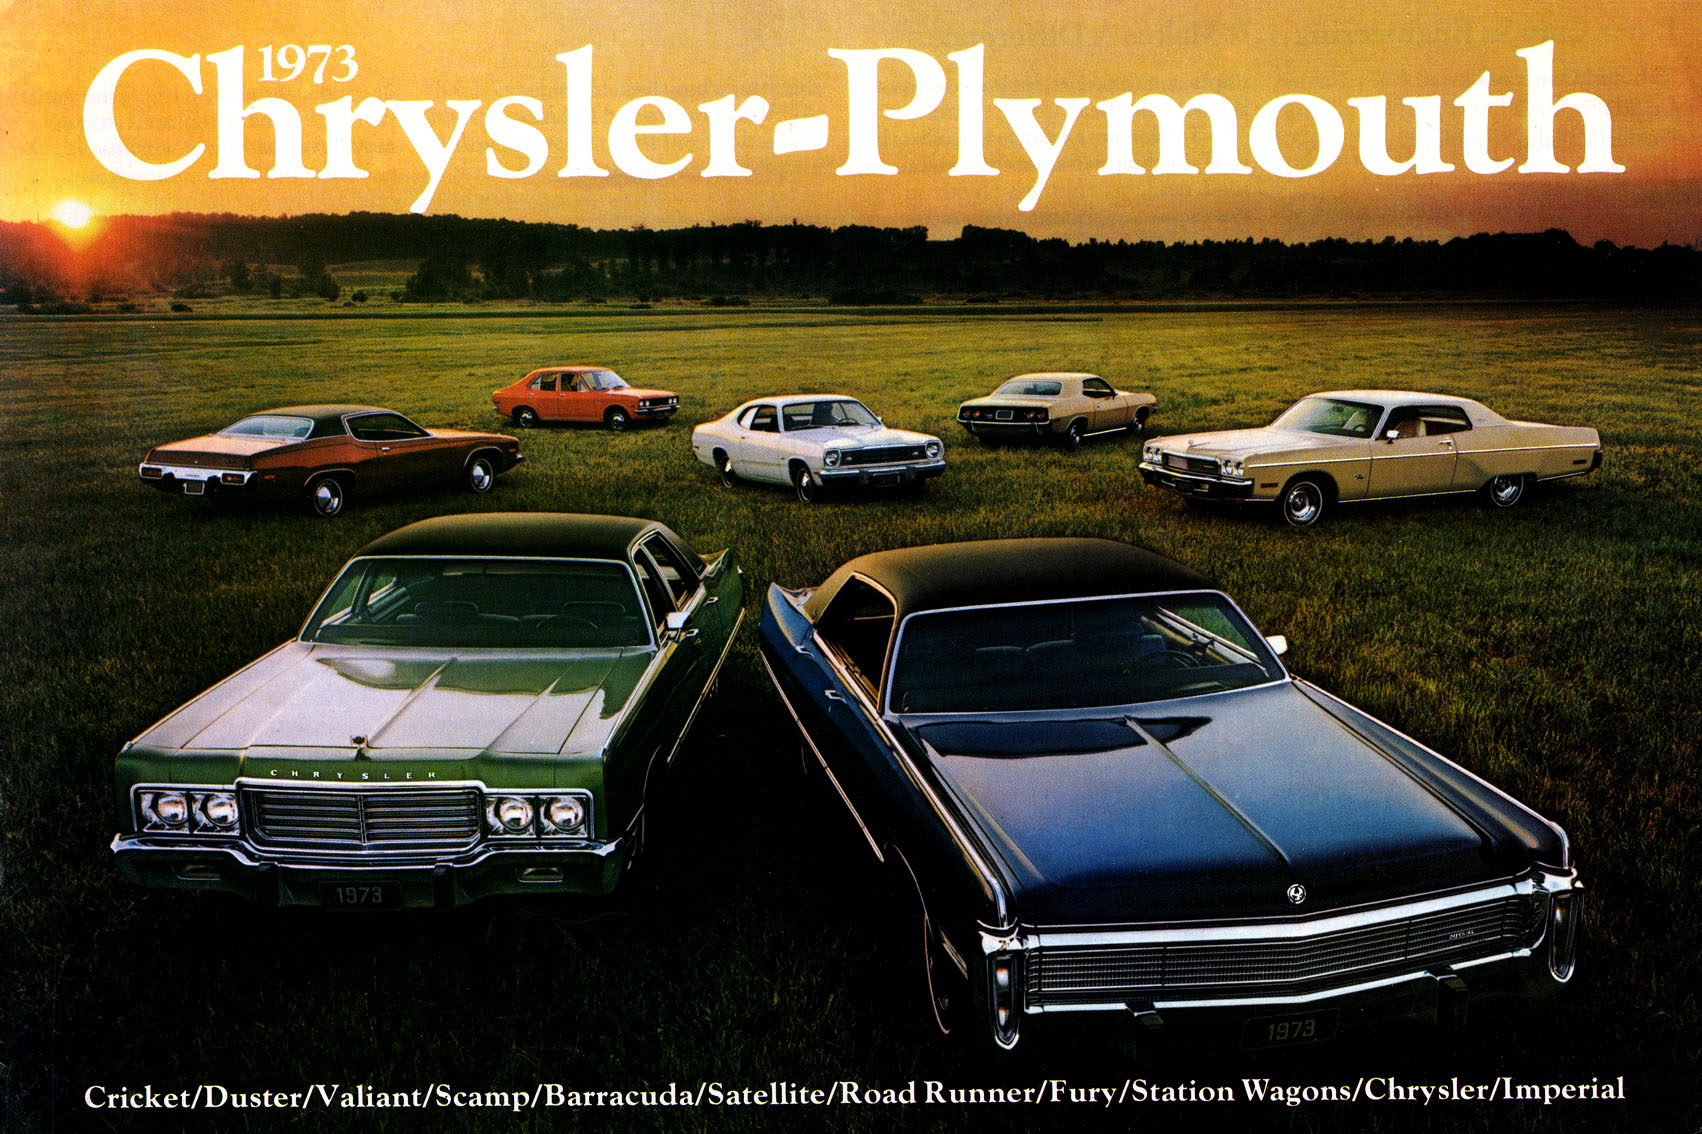 1973 Chrysler Plymouth Brochure Page 29